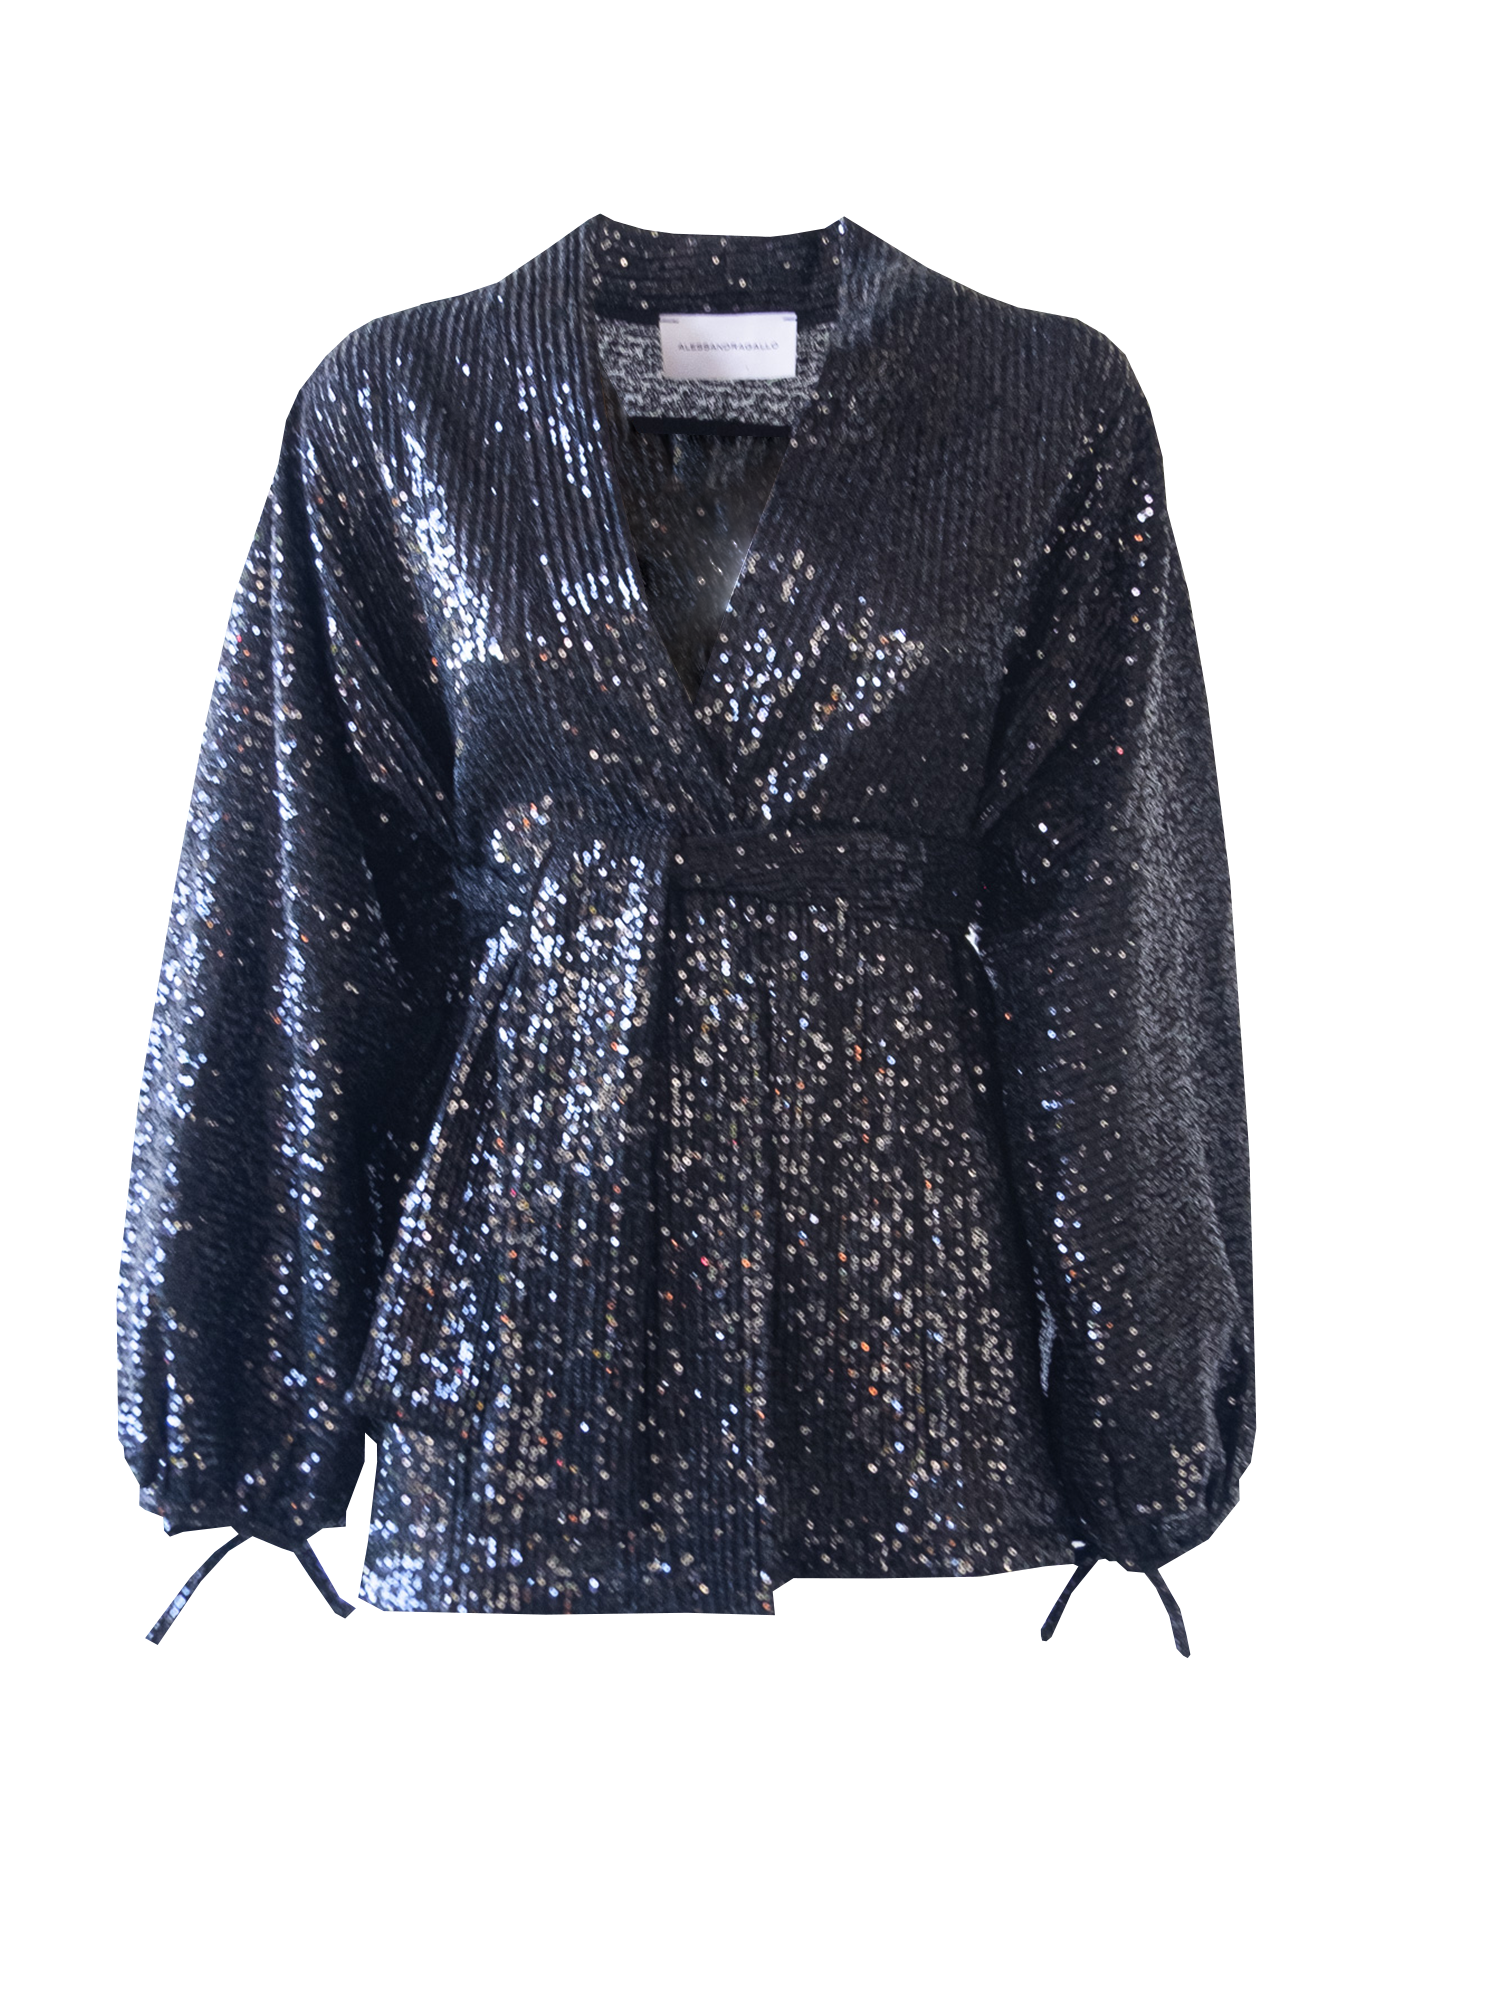 AMELIA - shirt with wide sleeves and sash in black sequins